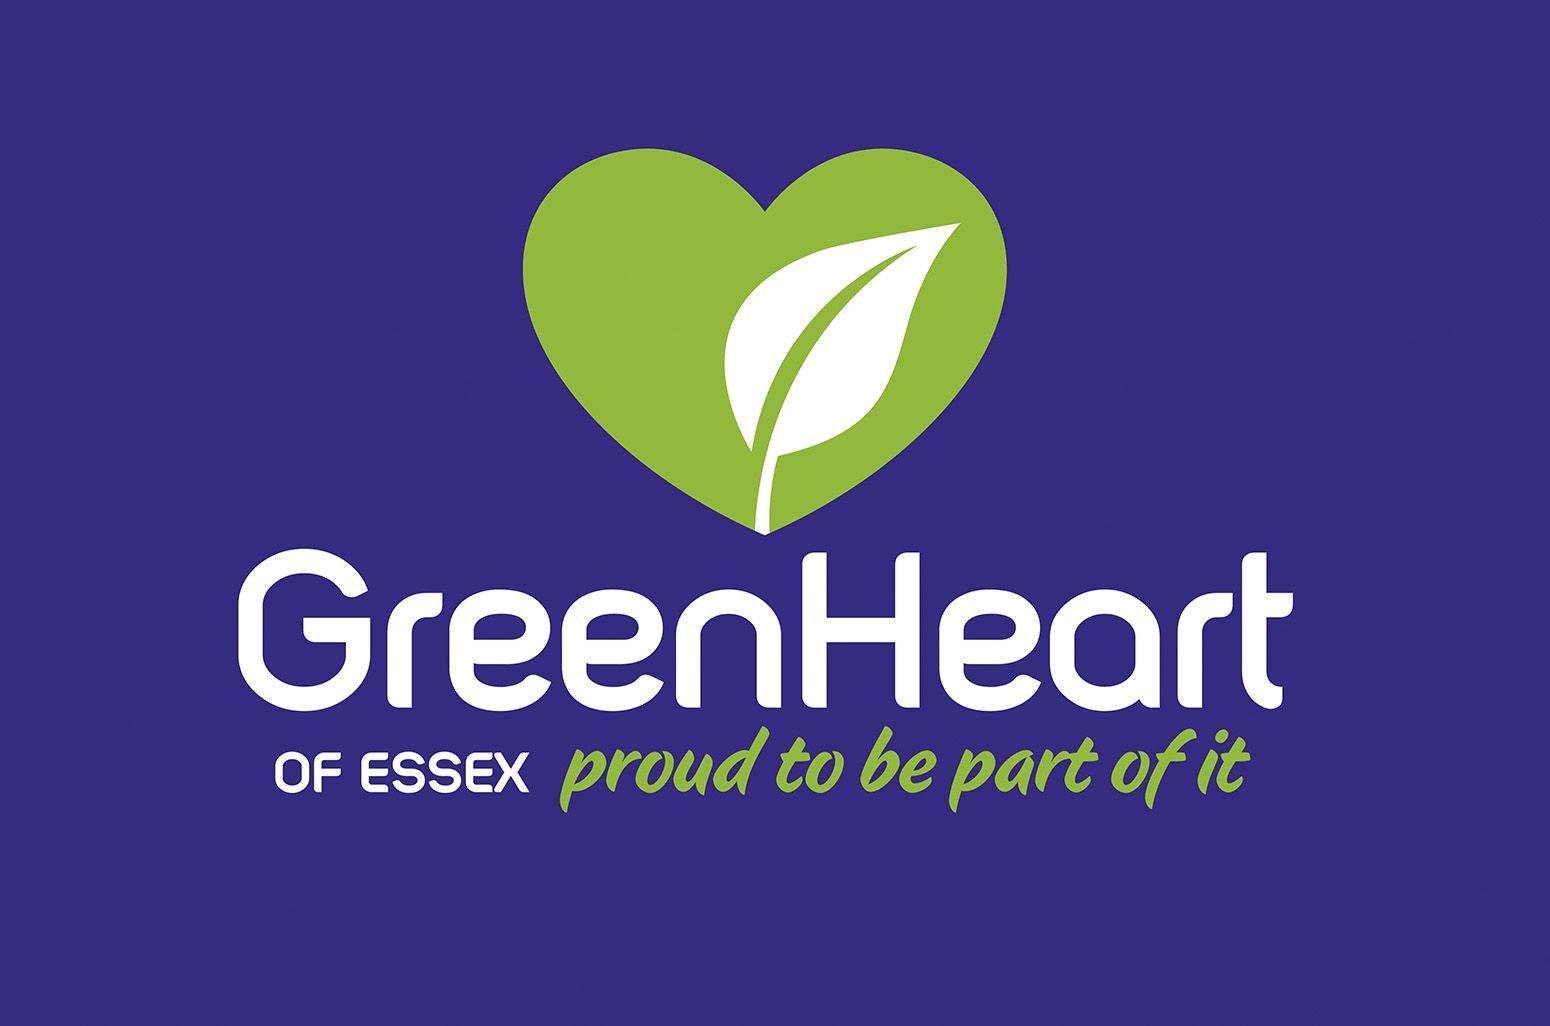 Blue and Green Heart Logo - The Green Heart of Essex